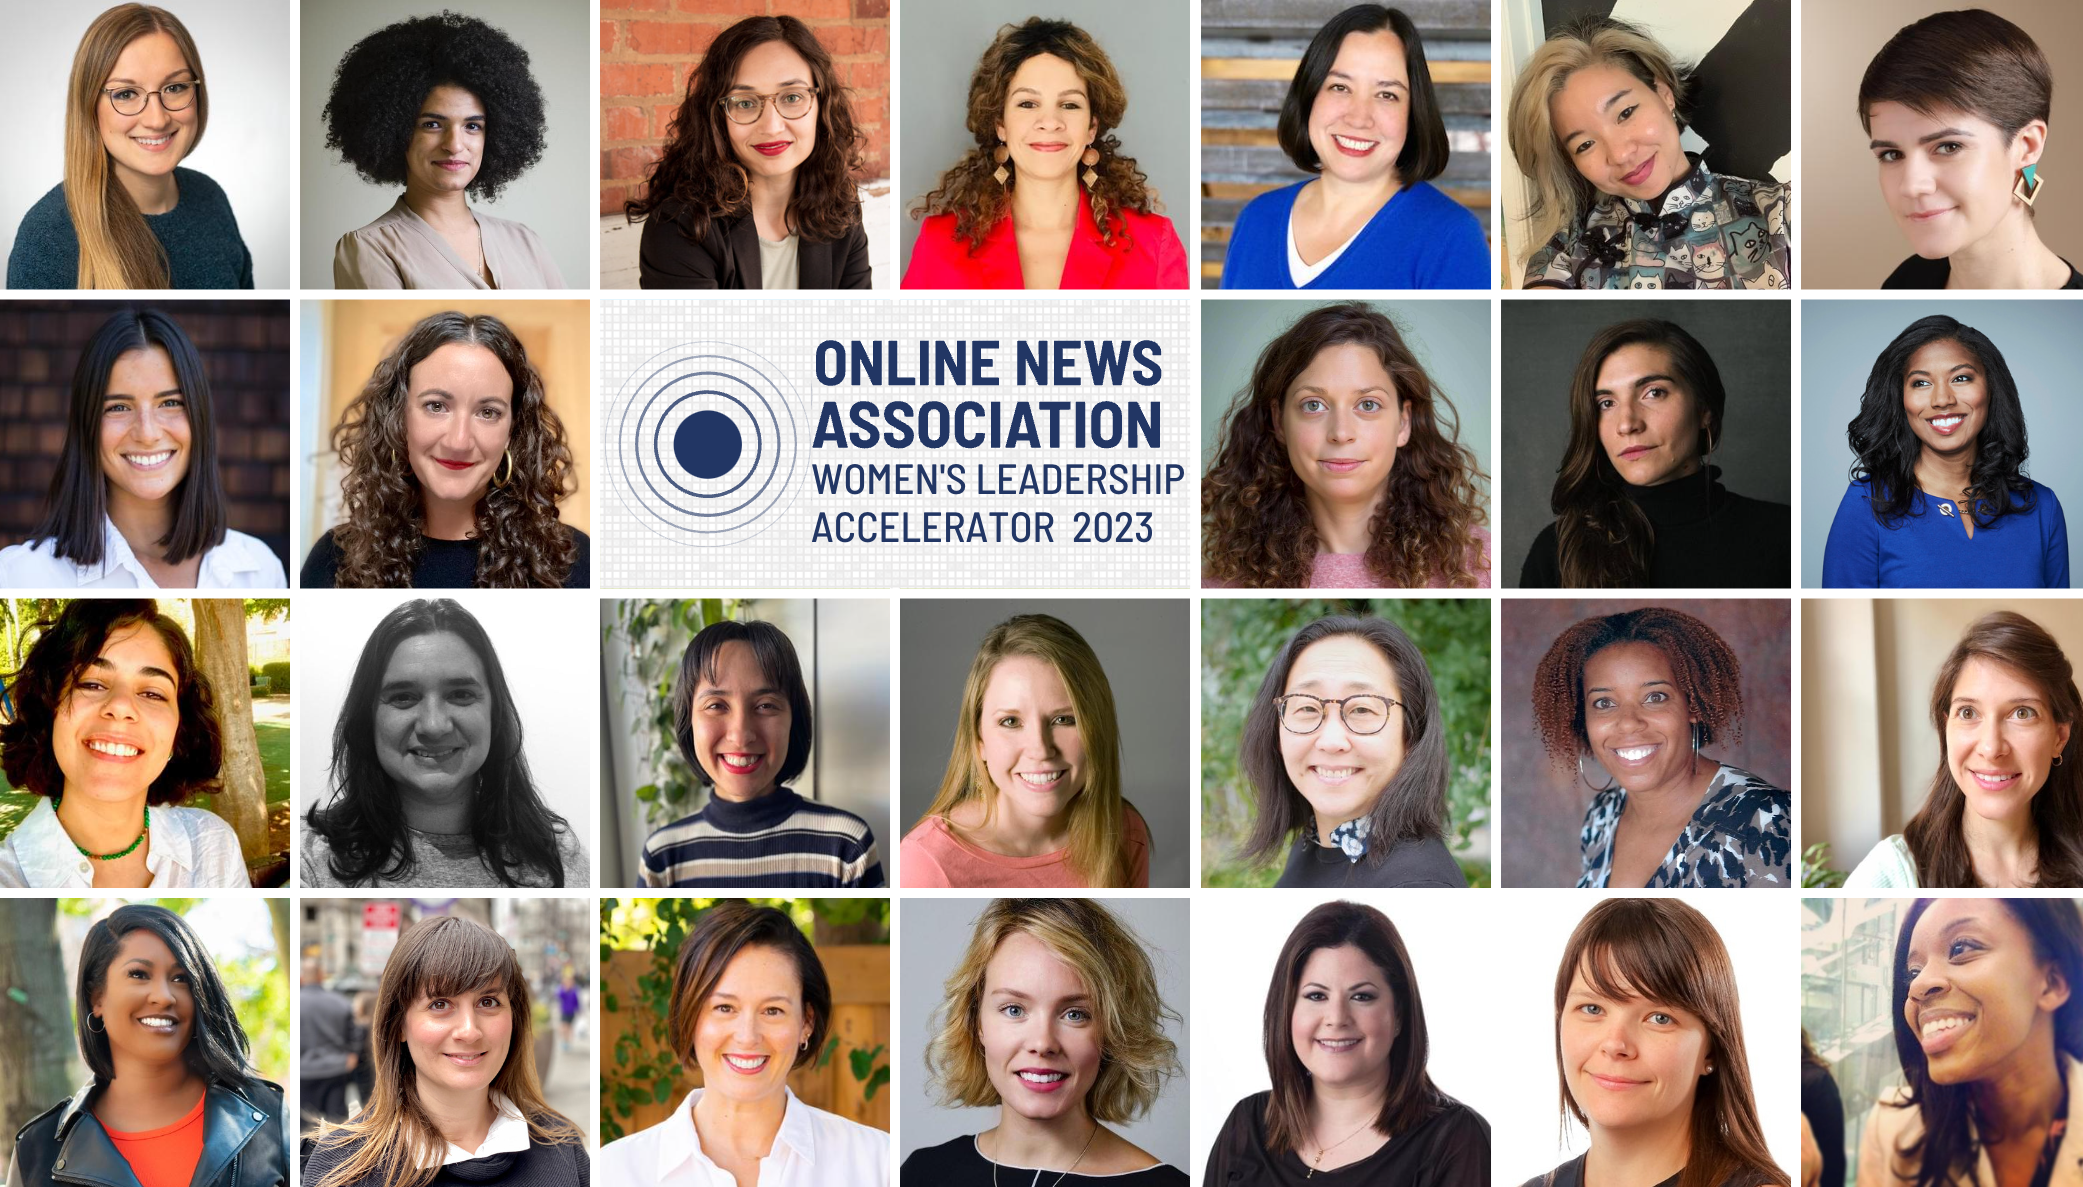 Headshots of the 26 members of the 2023 Online News Association's Women's Leadership Accelerator arranged in a grid.